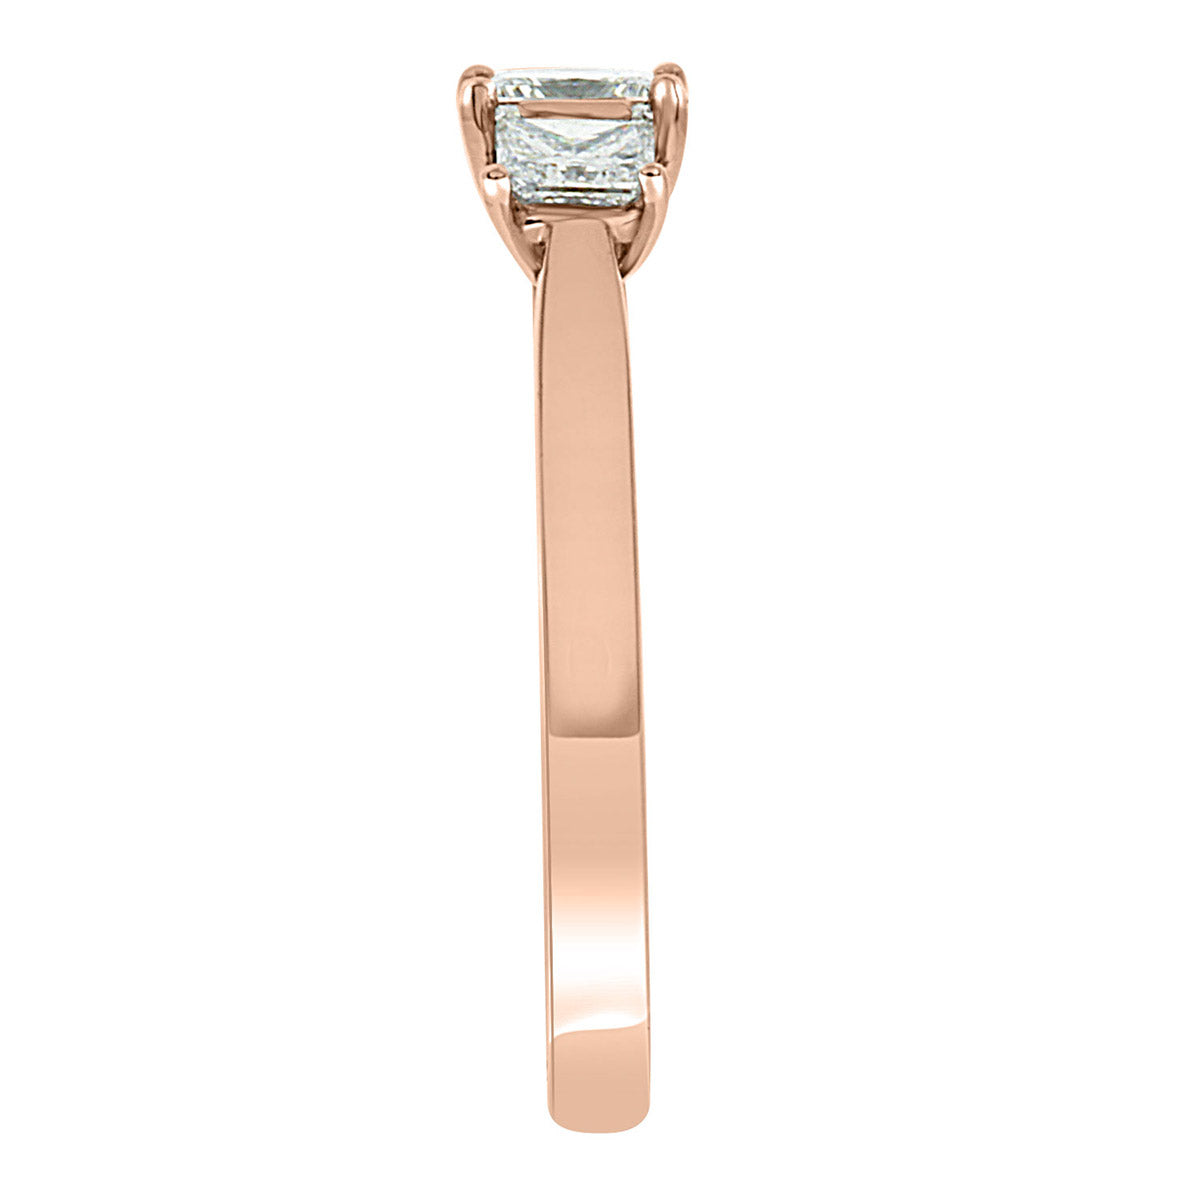 Princess and Round Three Stone in rose gold in end view position